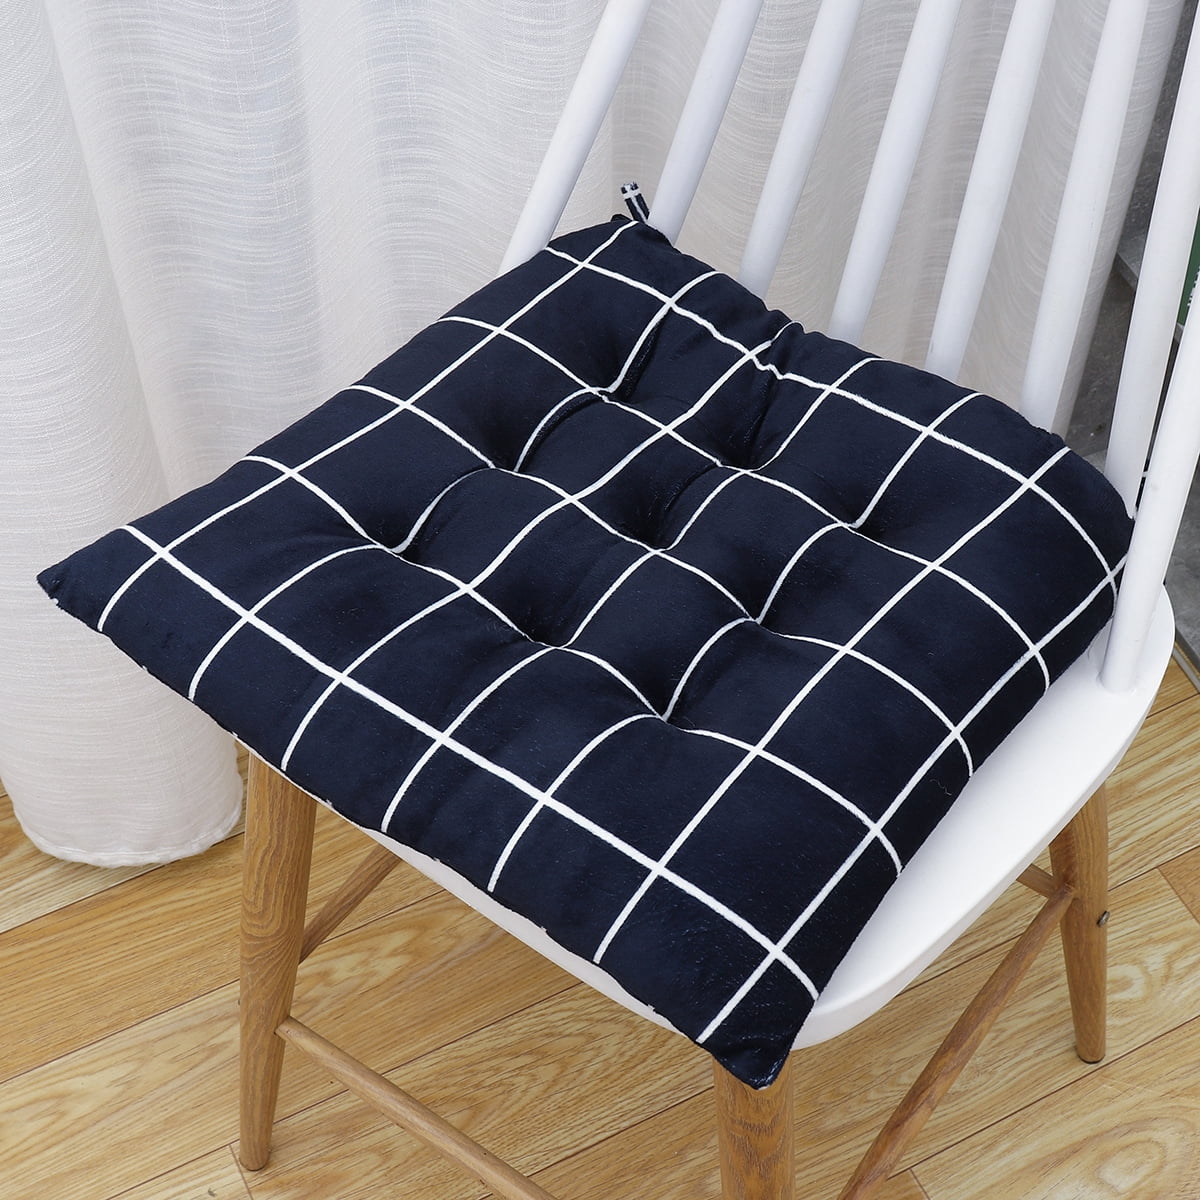 REMOVABLE CHAIR SEAT PADS WITH TIES OFFICE HOME GARDEN USE 15"X15" APPROX 